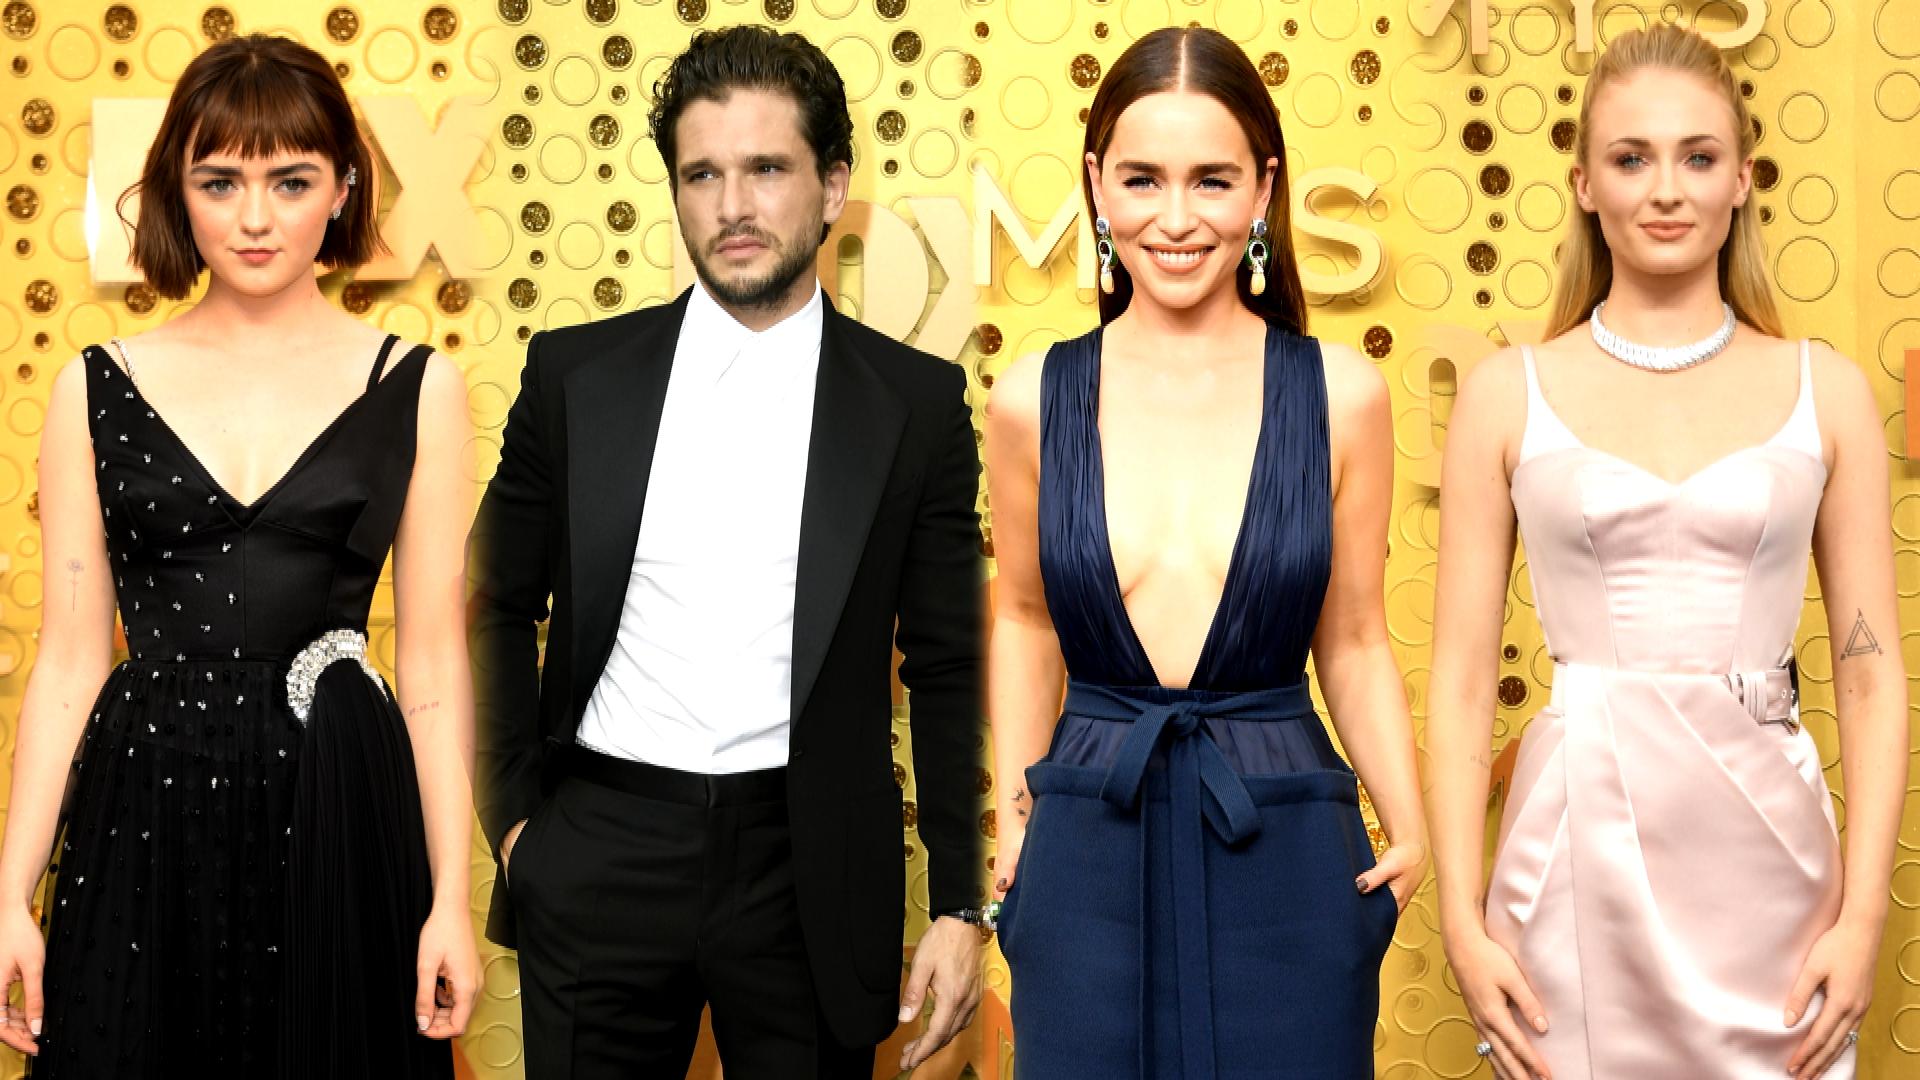 Emmys 2019: Why 4 'Game of Thrones' Weren't Onstage With the Rest of the  Cast